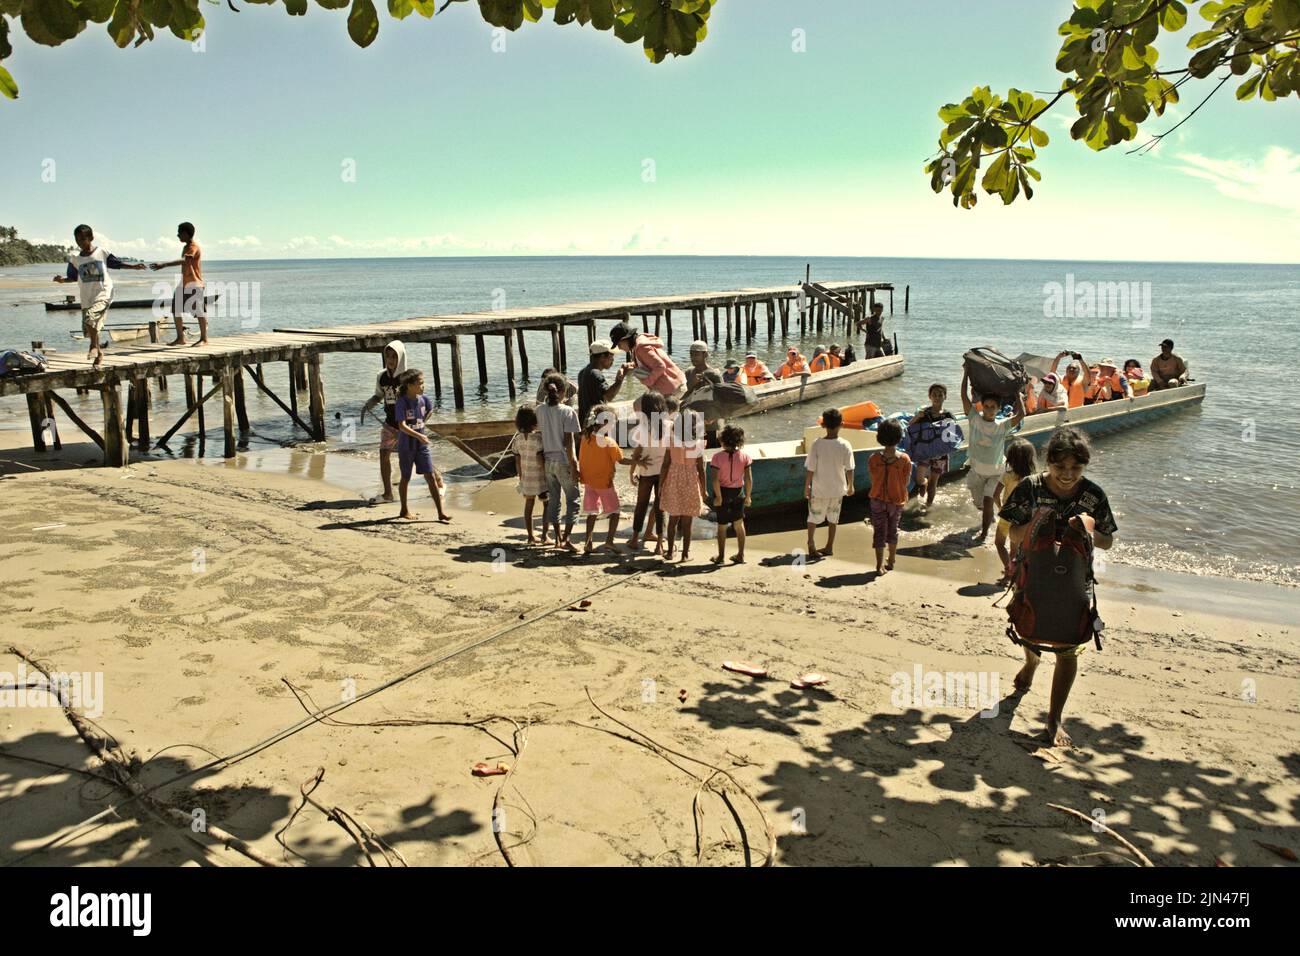 Villagers welcoming a boat carrying tourists to help with the baggages on the beach of Horale village in Seram Utara Barat, Maluku Tengah, Maluku, Indonesia. Stock Photo